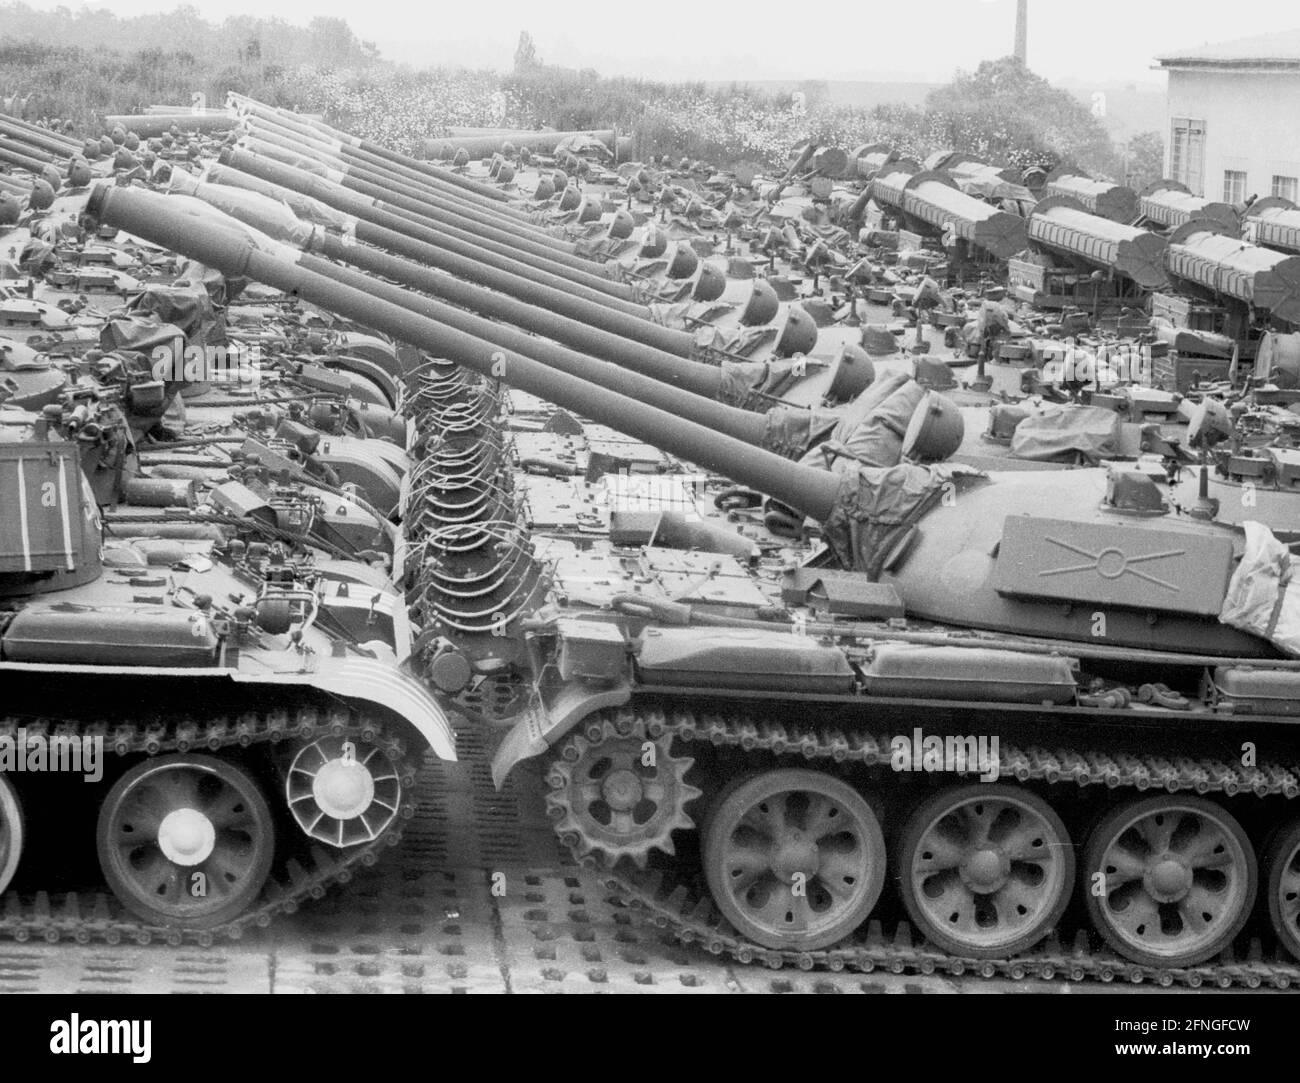 Saxony / GDR State / Unification / 1990 GDR tanks of the type T55 are waiting to be scrapped, grounds of the People's Army in Loebau. The People's Army is disbanded, most of the weapons are destroyed or sold abroad // Militaer / Waffen / Bundeslaender / Militaer / / DDR-Staat *** Local Caption *** East Germany / Communist Germany End of the Cold War. In Saxony tanks of the East German Army are scapped according to agreements with Soviet Union and the Western Allies. [automated translation] Stock Photo